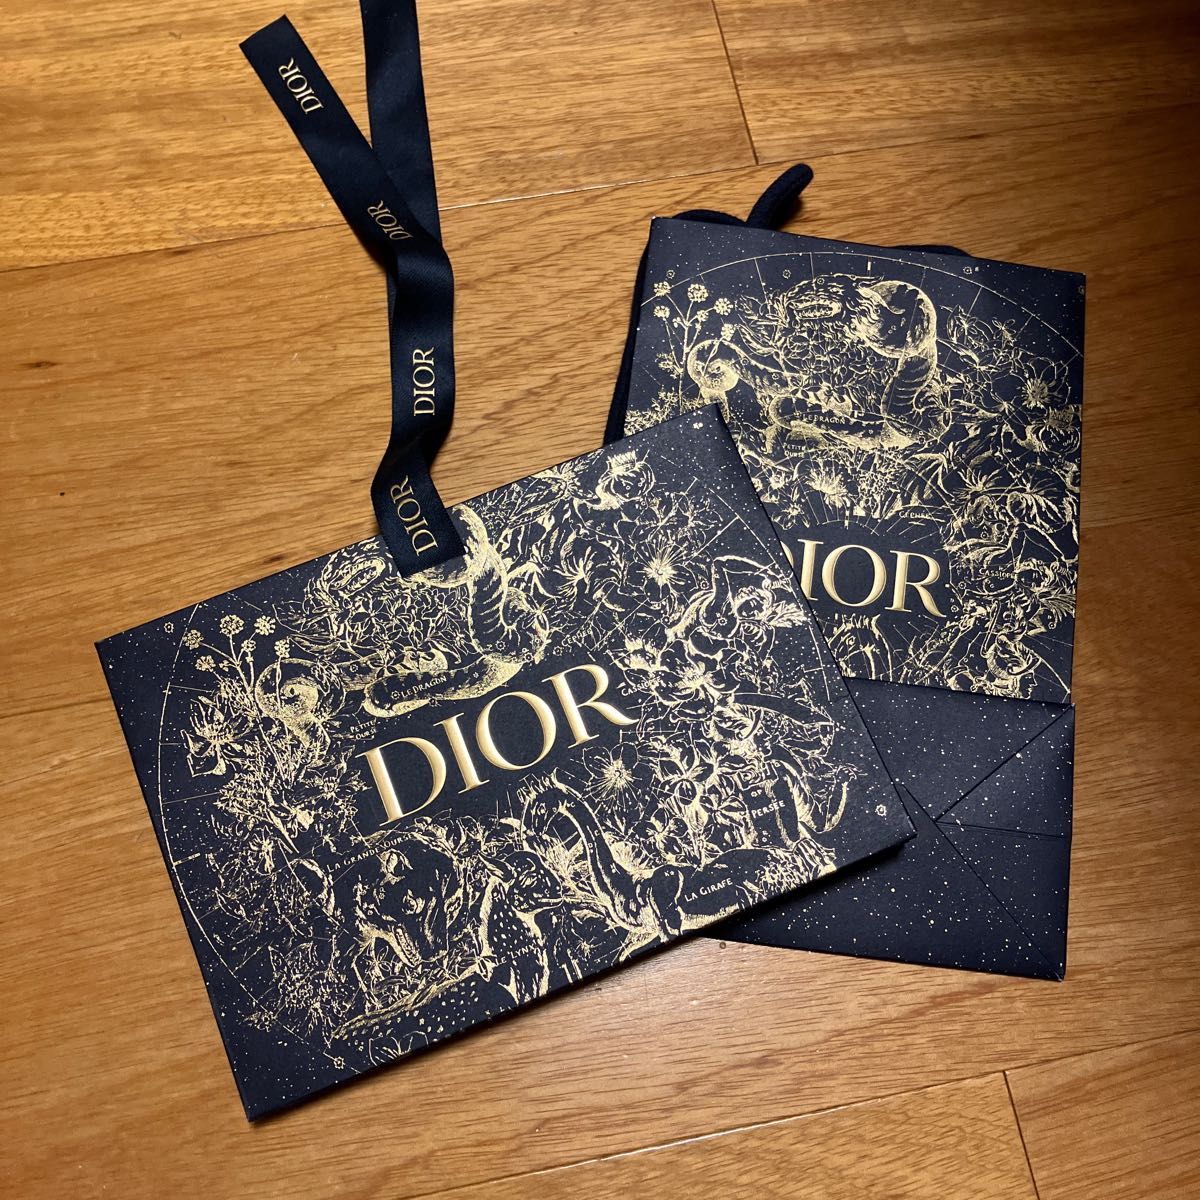 Dior 紙袋 ギフトラッピング ギフトボックス ホリデー クリスマス限定